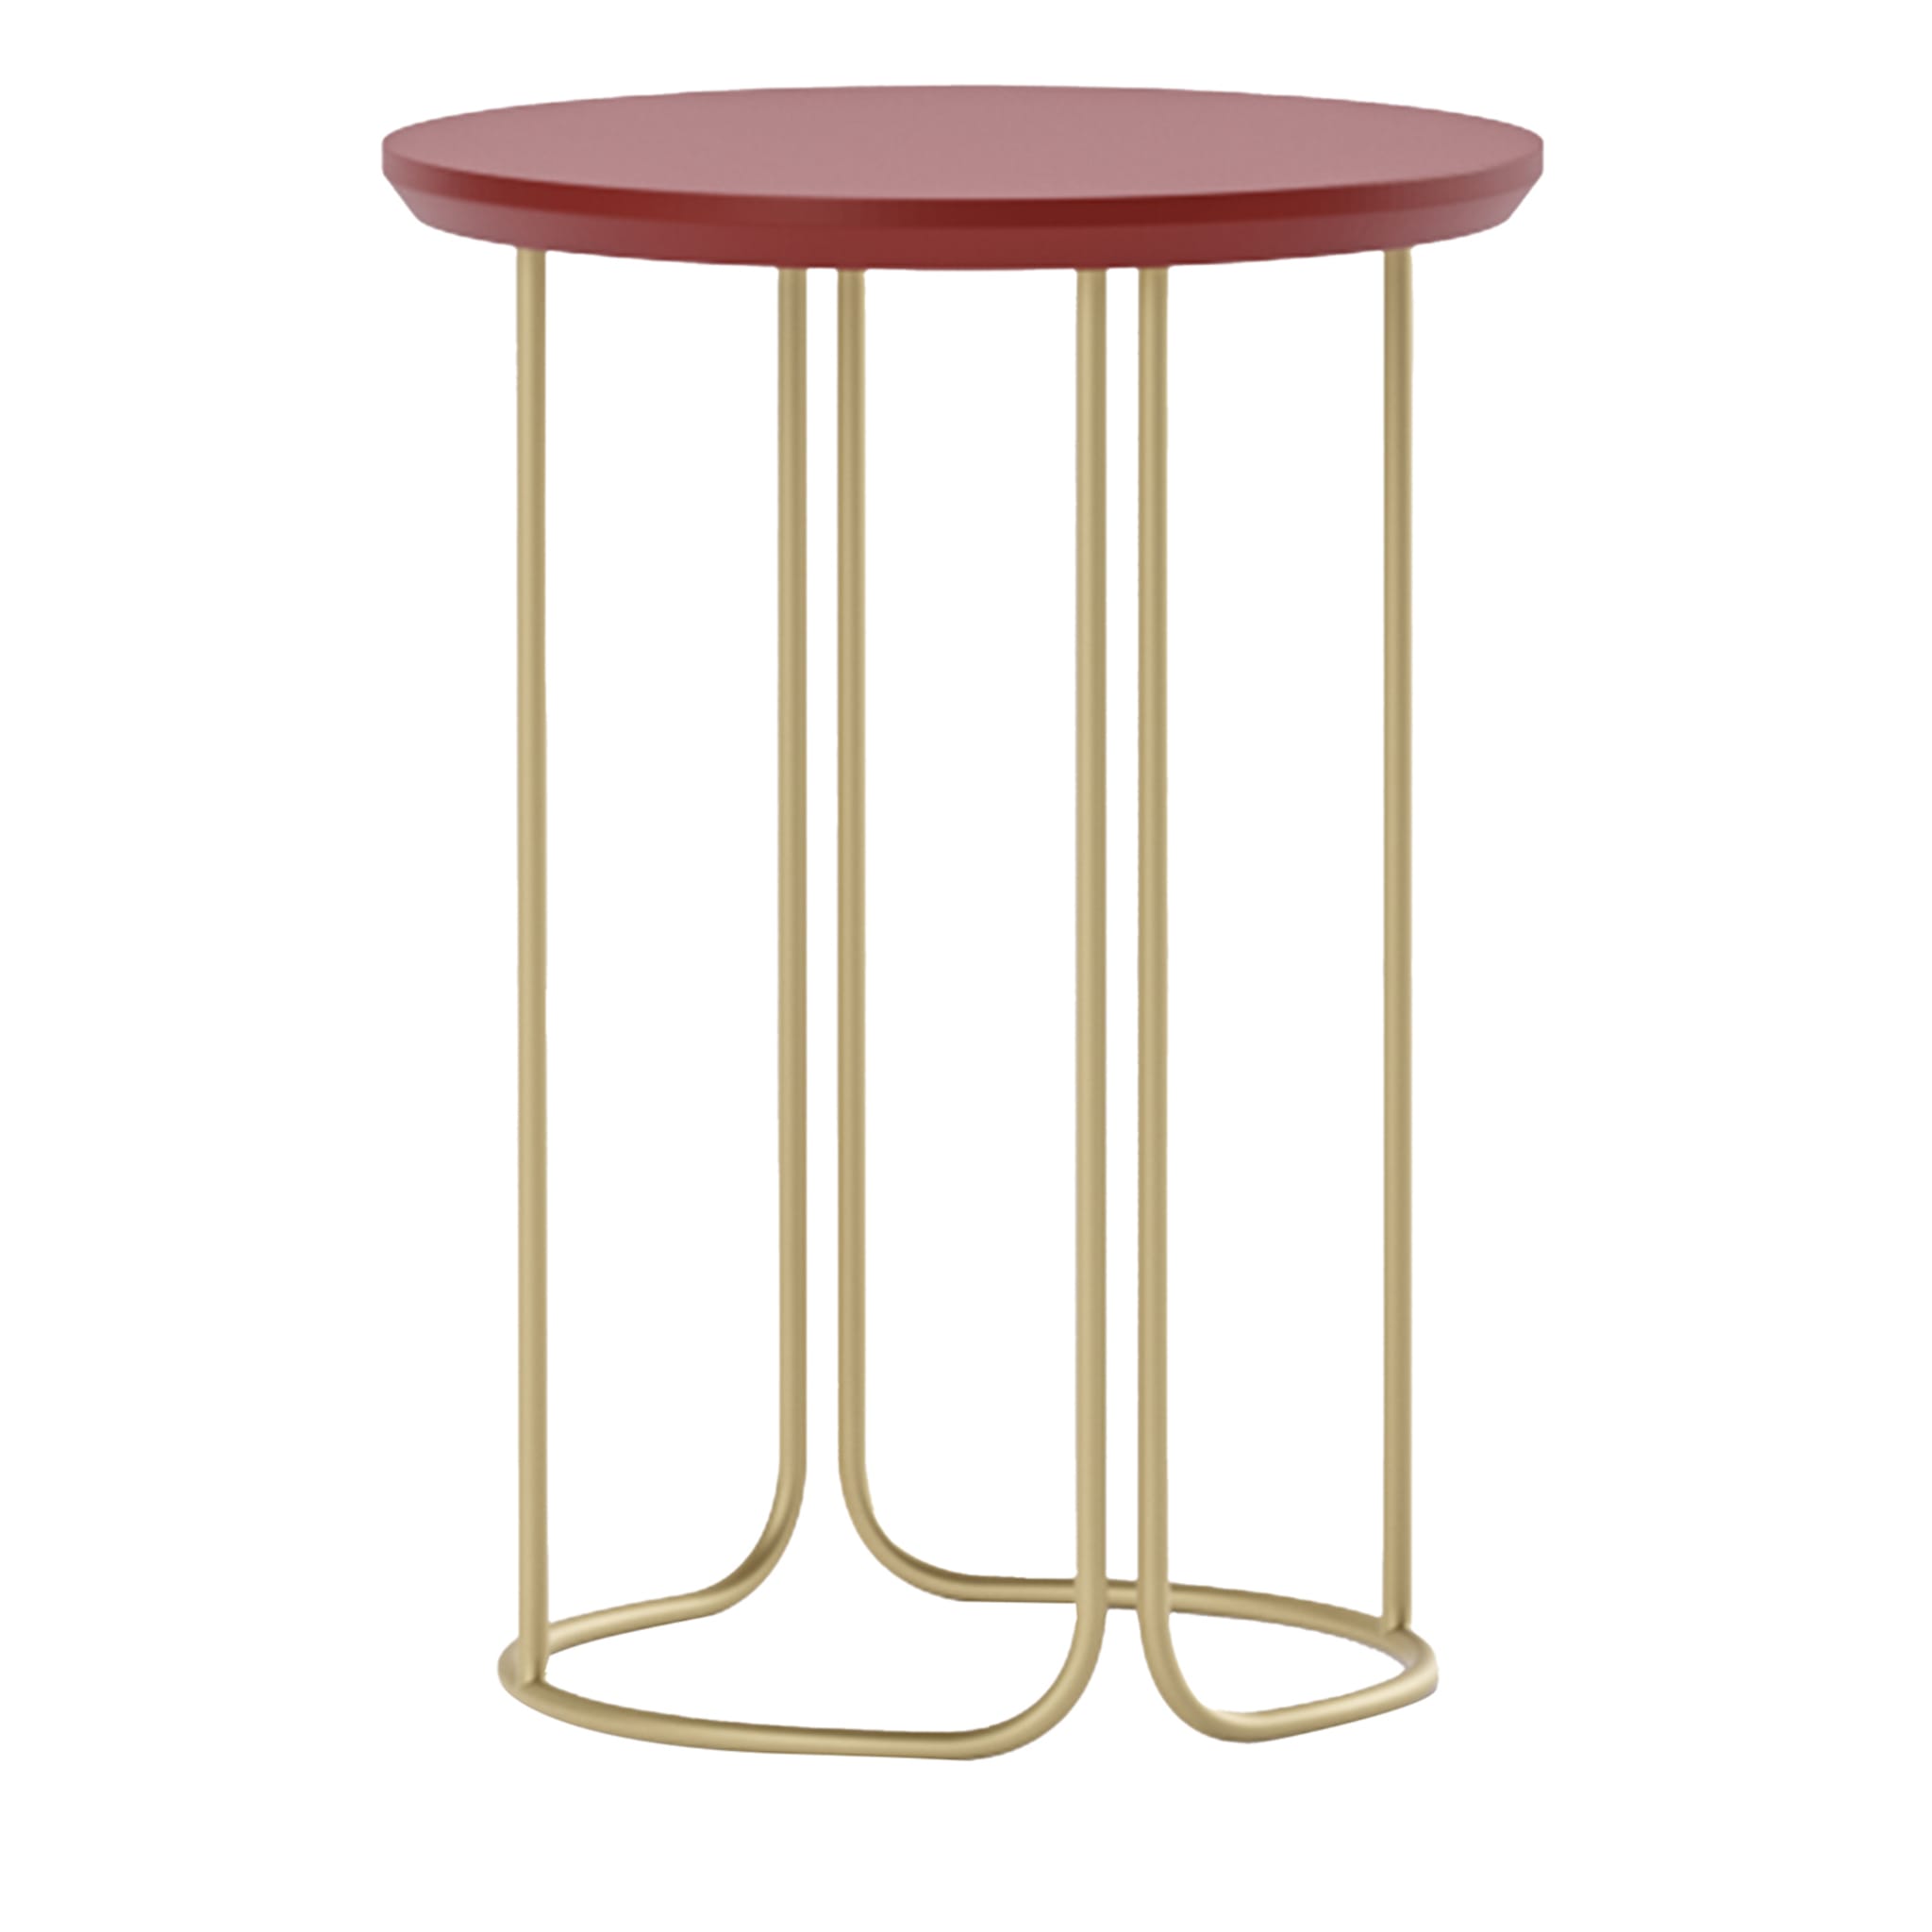 Scala Round Red & Gold Side Table by Marco Piva - Main view